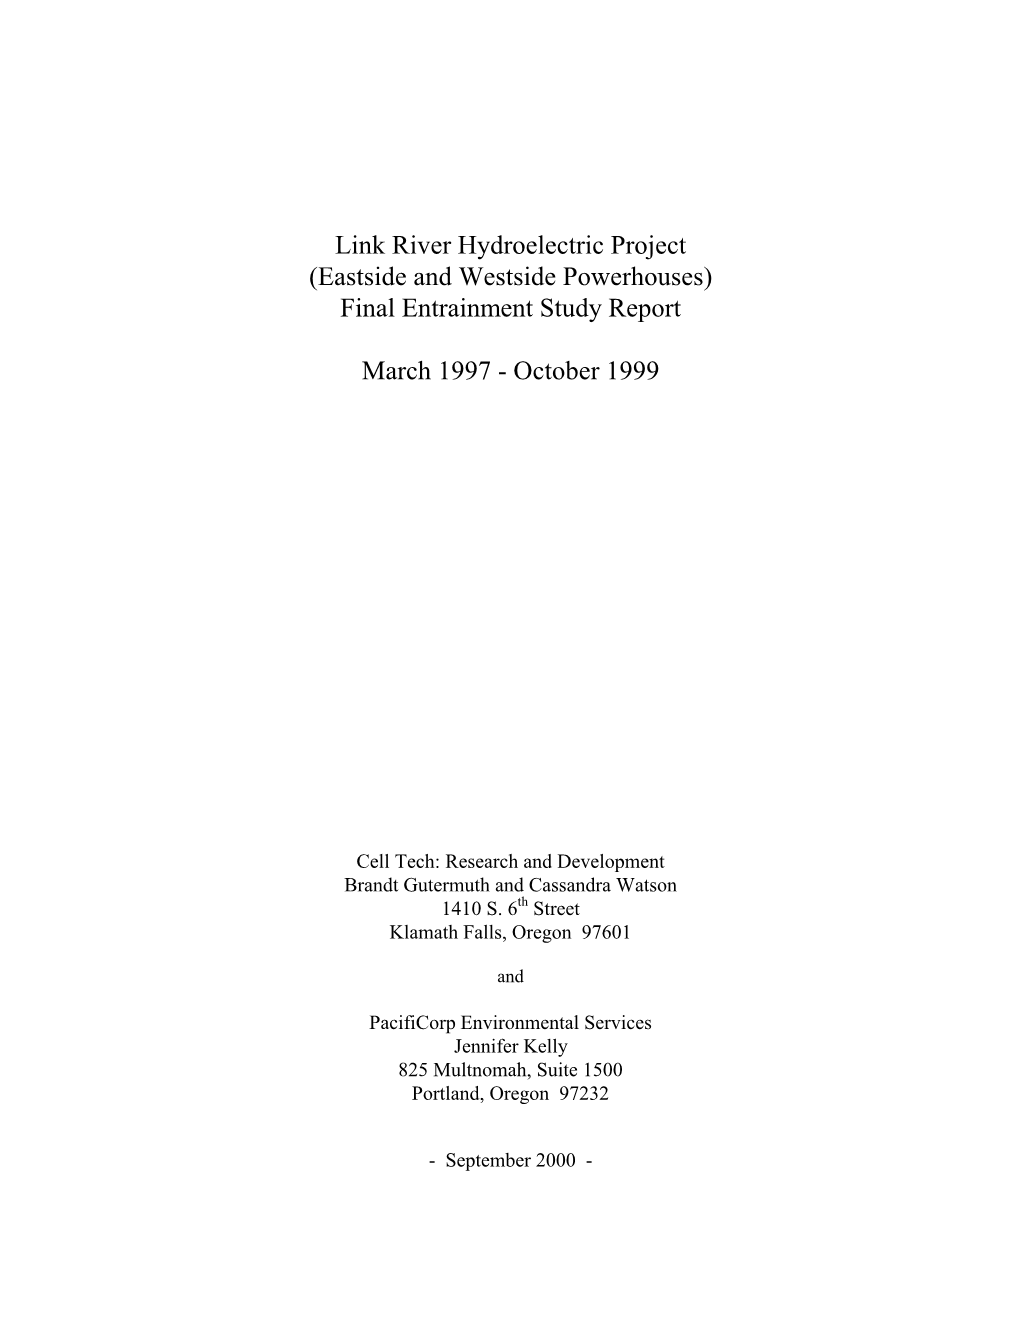 Link River Hydroelectric Project Final Entrainment Study